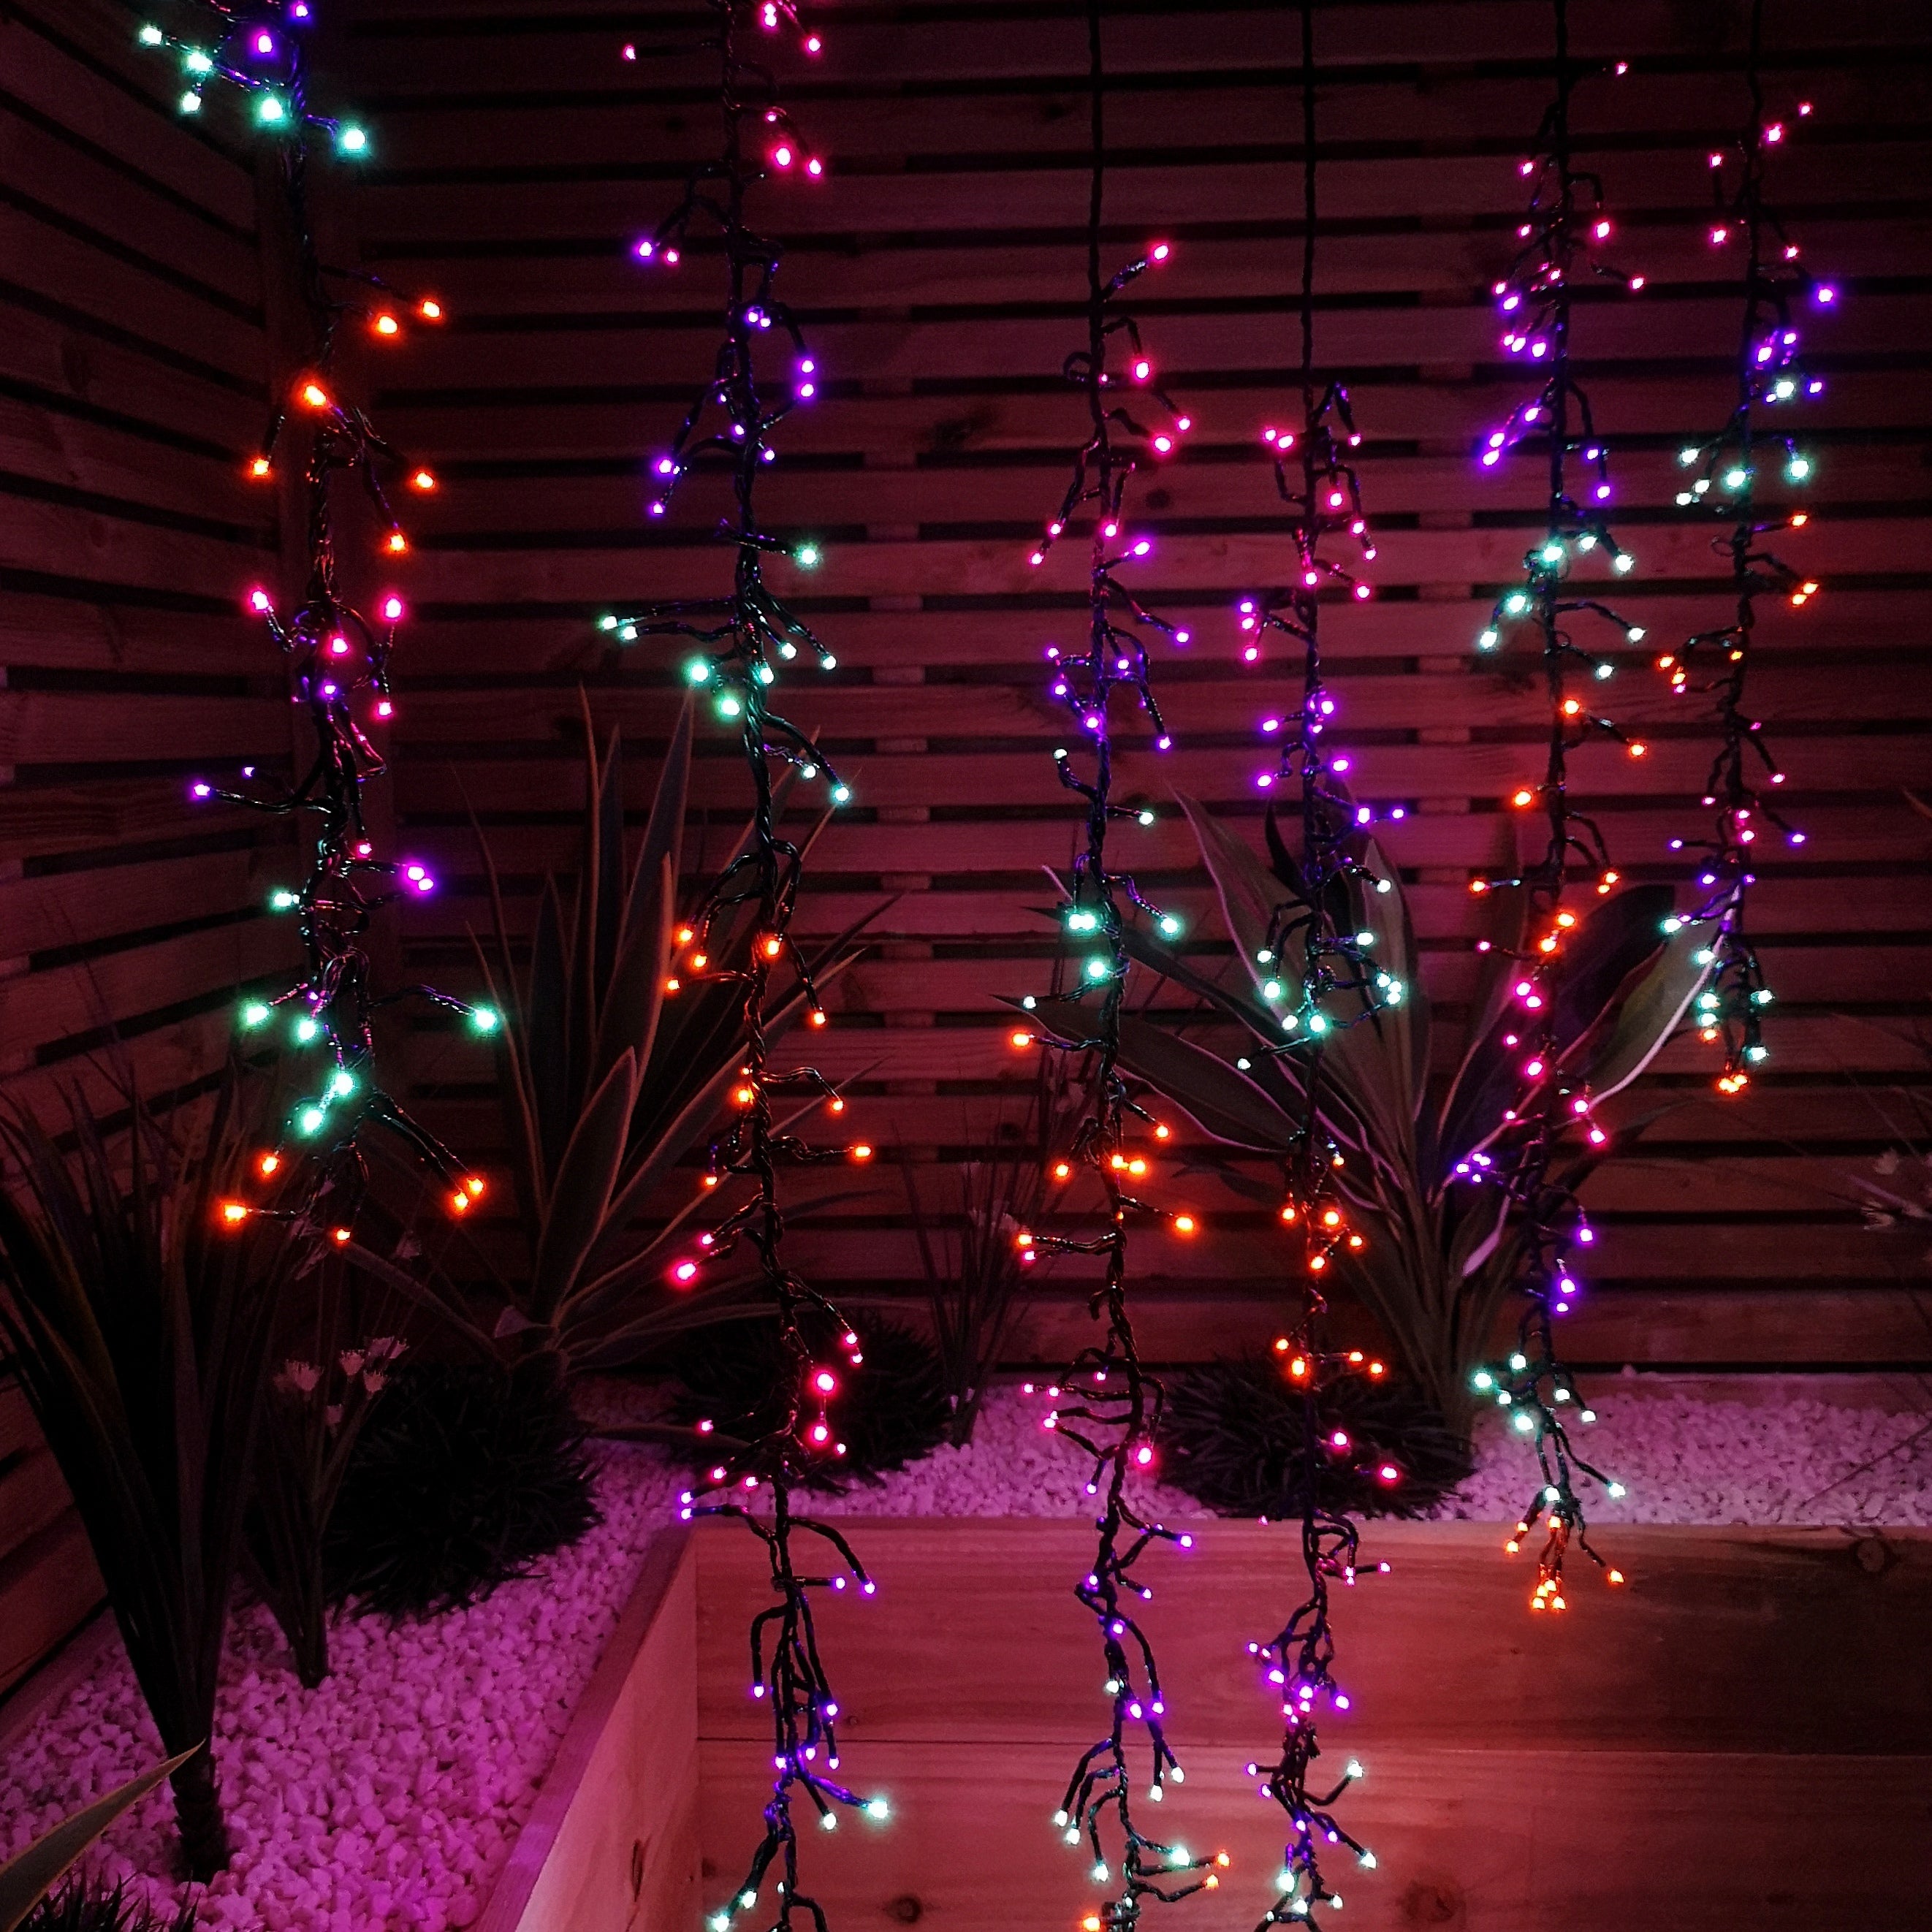 Set of 6 Drop Tree Multi-Action Christmas ClusterBrights with 384 Rainbow LEDs